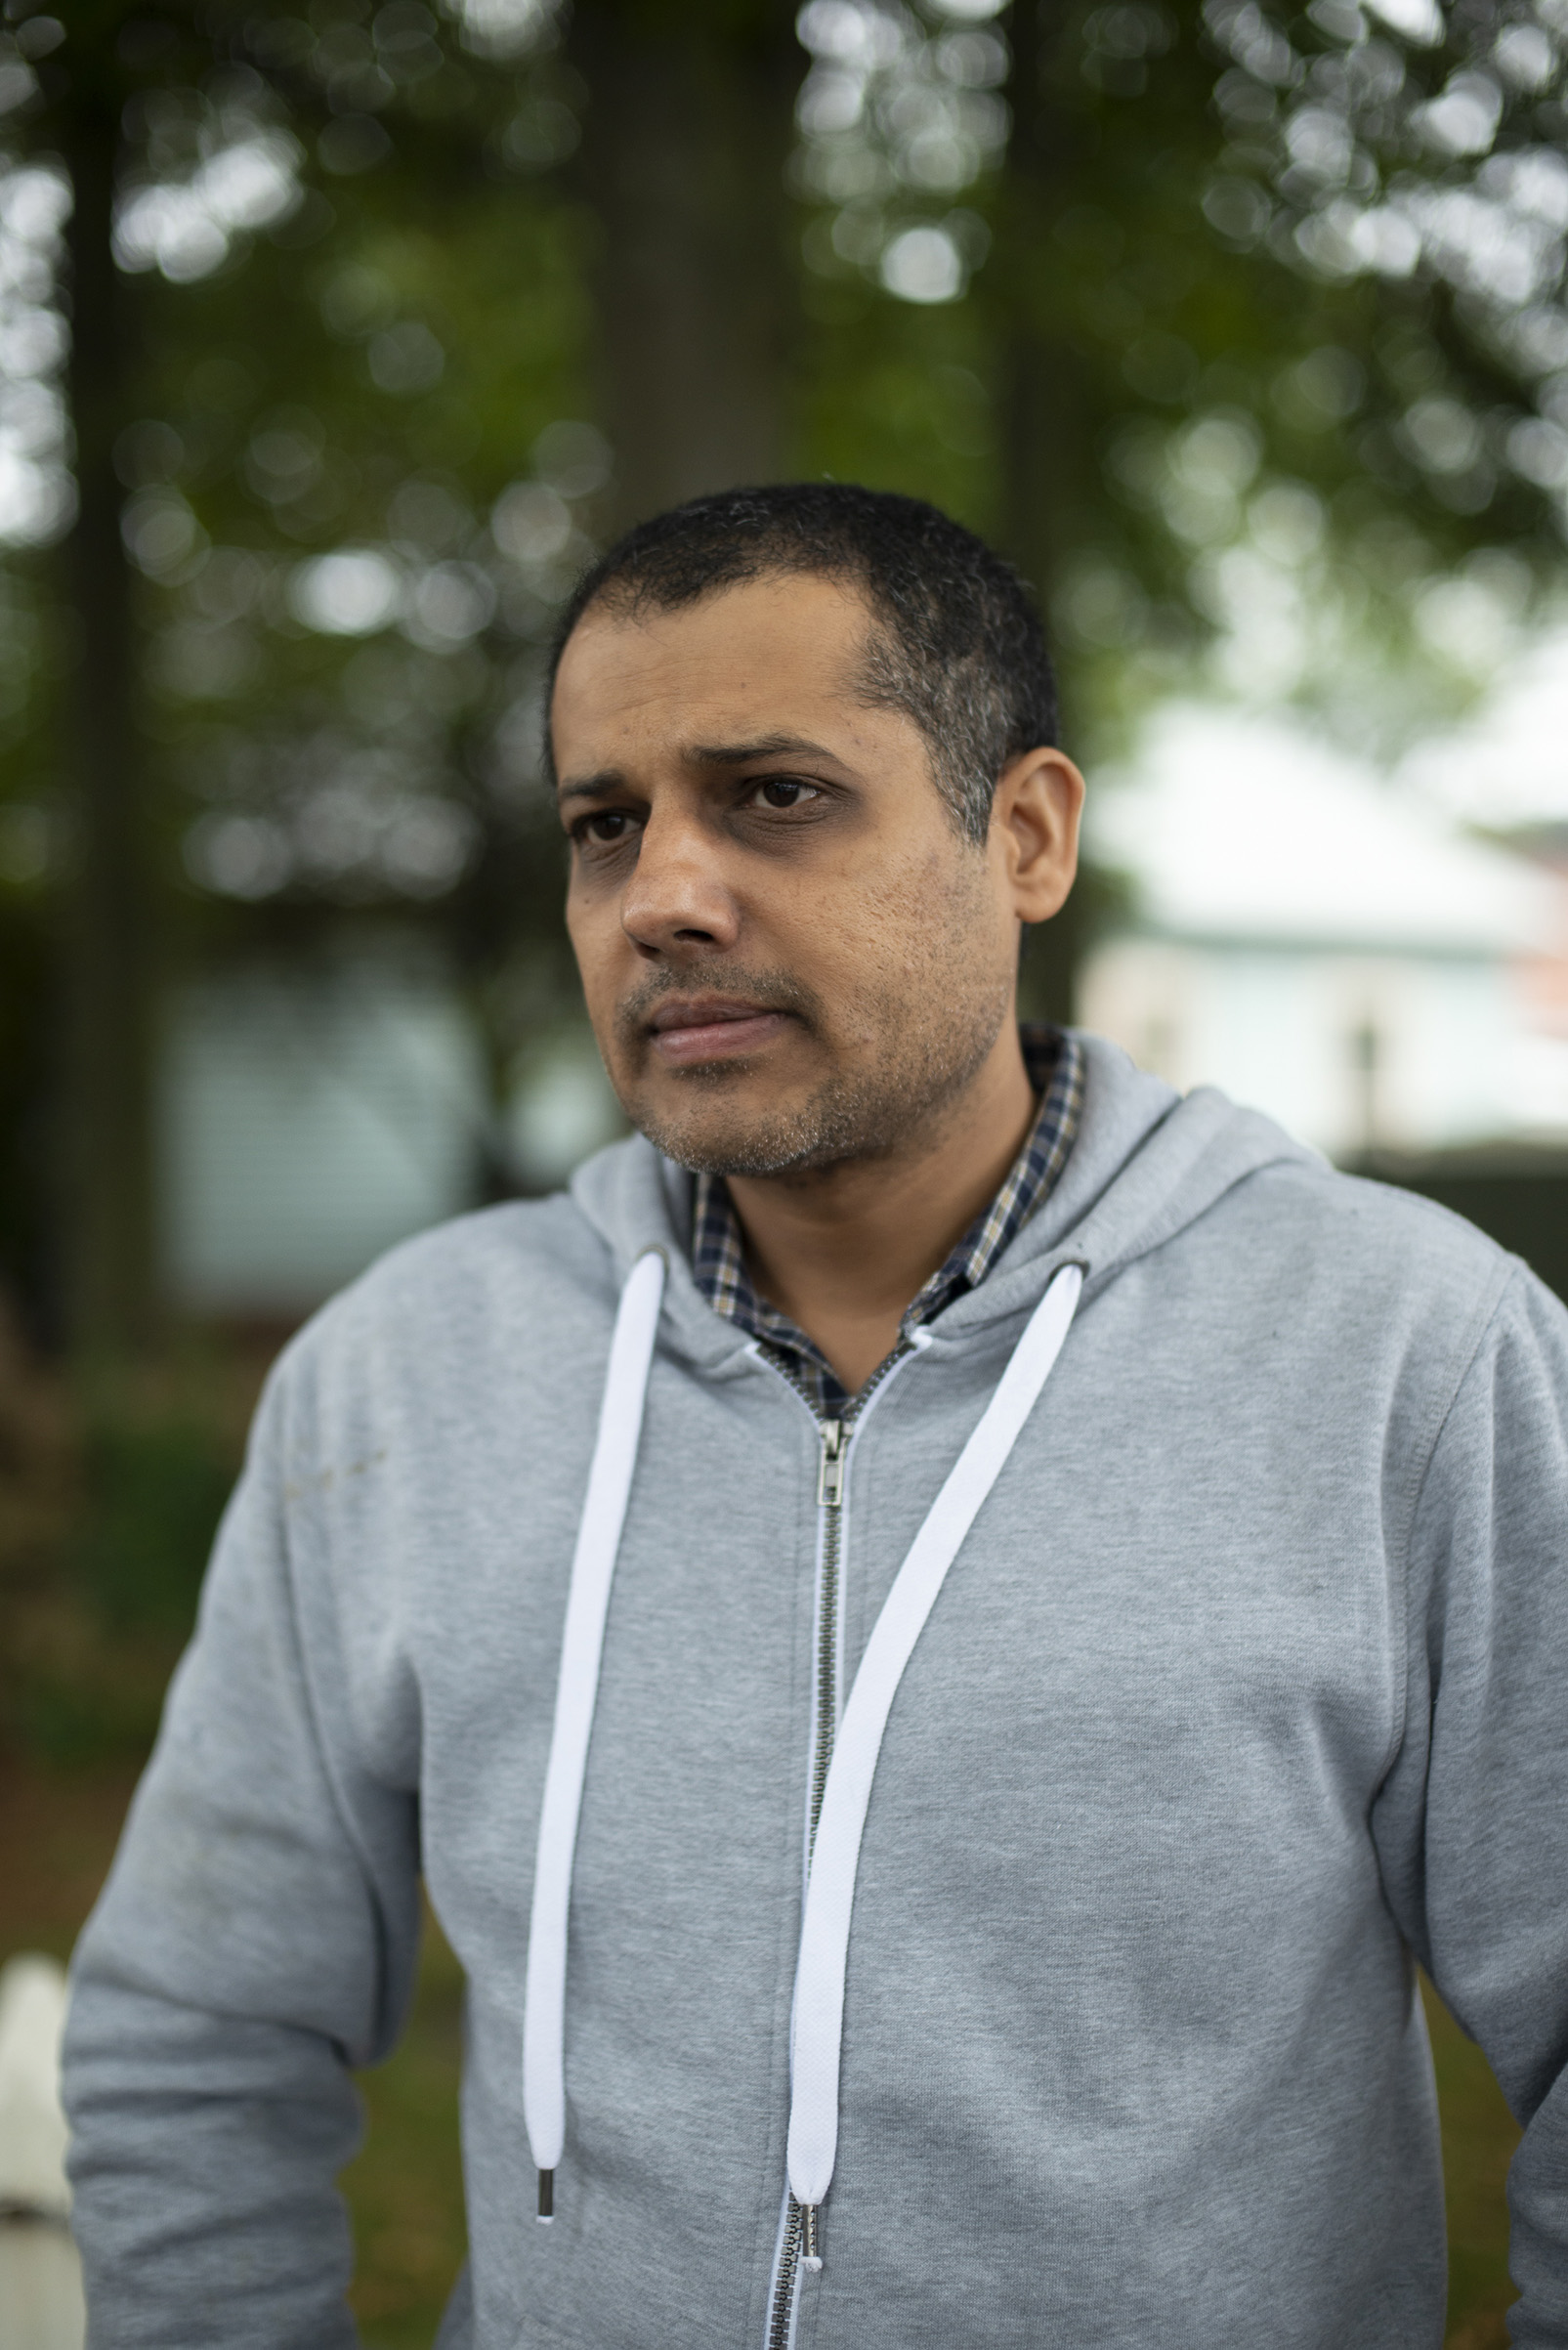 Mohsan Ali, 37, narrowly escaped the attack on the Al Noor mosque in Christchurch, New Zealand. His wife survived by hiding in a bathroom. (Virginia Woods-Jack for TIME)